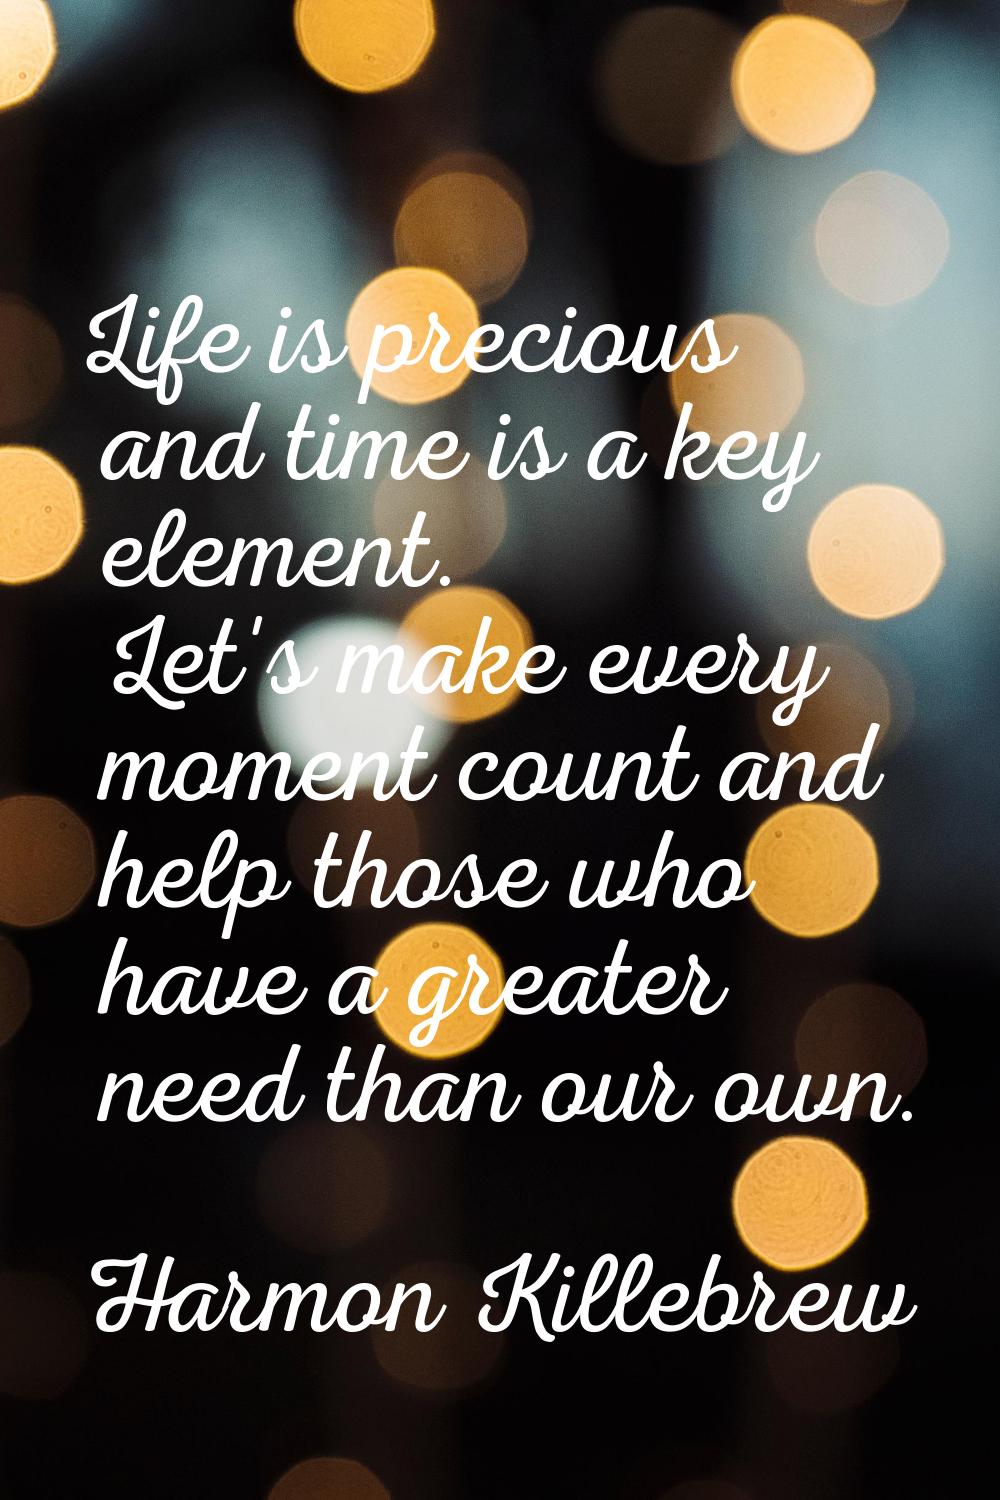 Life is precious and time is a key element. Let's make every moment count and help those who have a